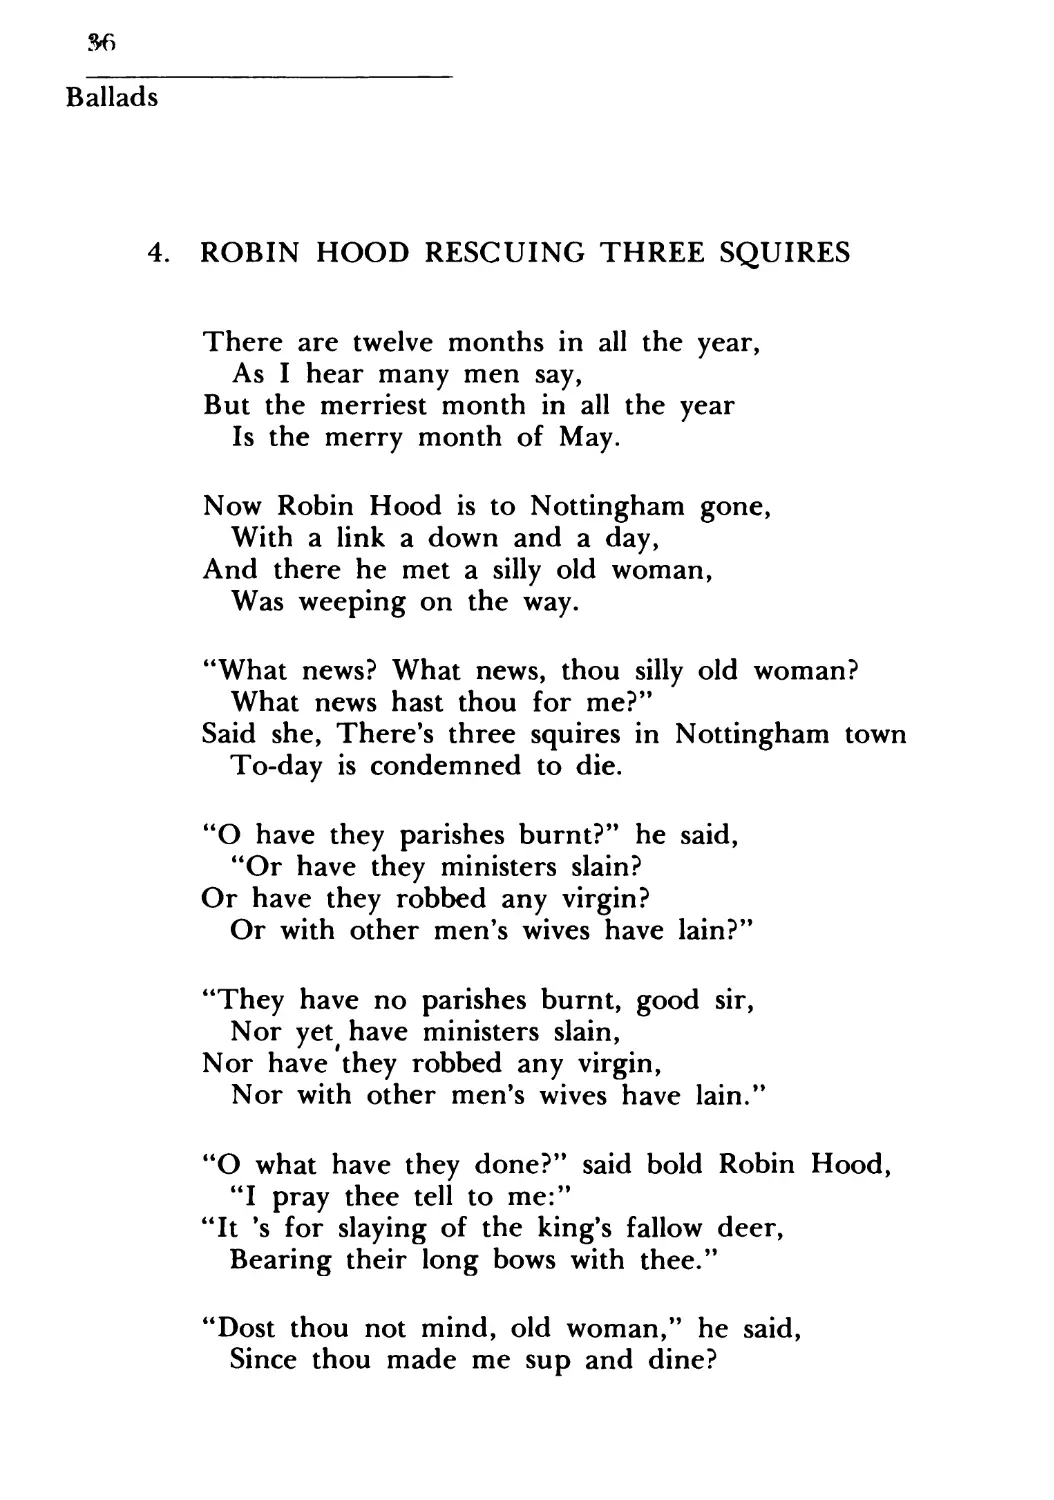 4. Robin Hood Rescuing Three Squires